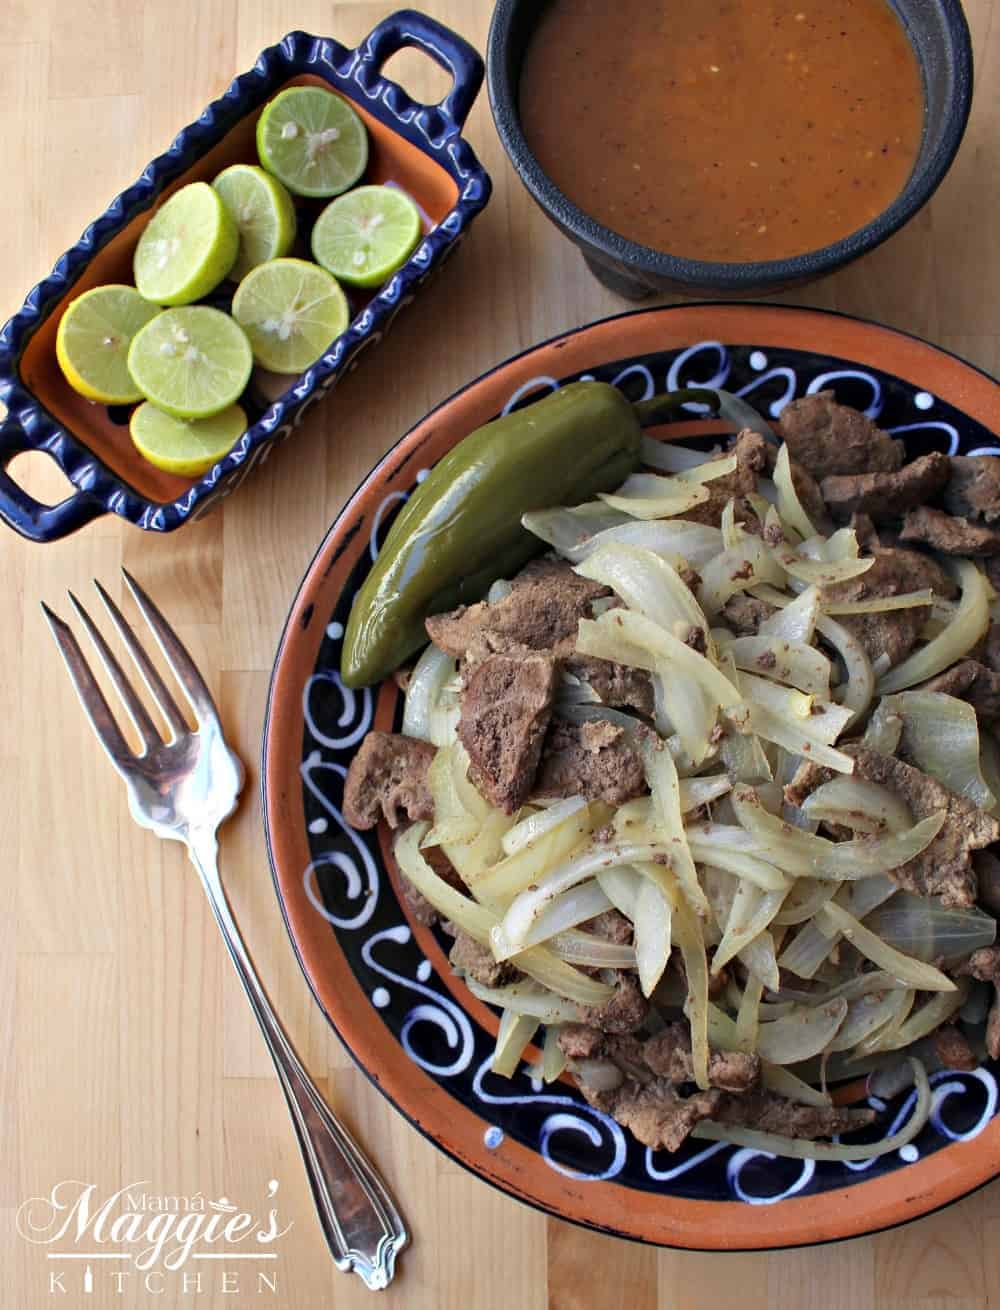 Beef liver and onions in a decorative Mexican plate next to a fork and limes.